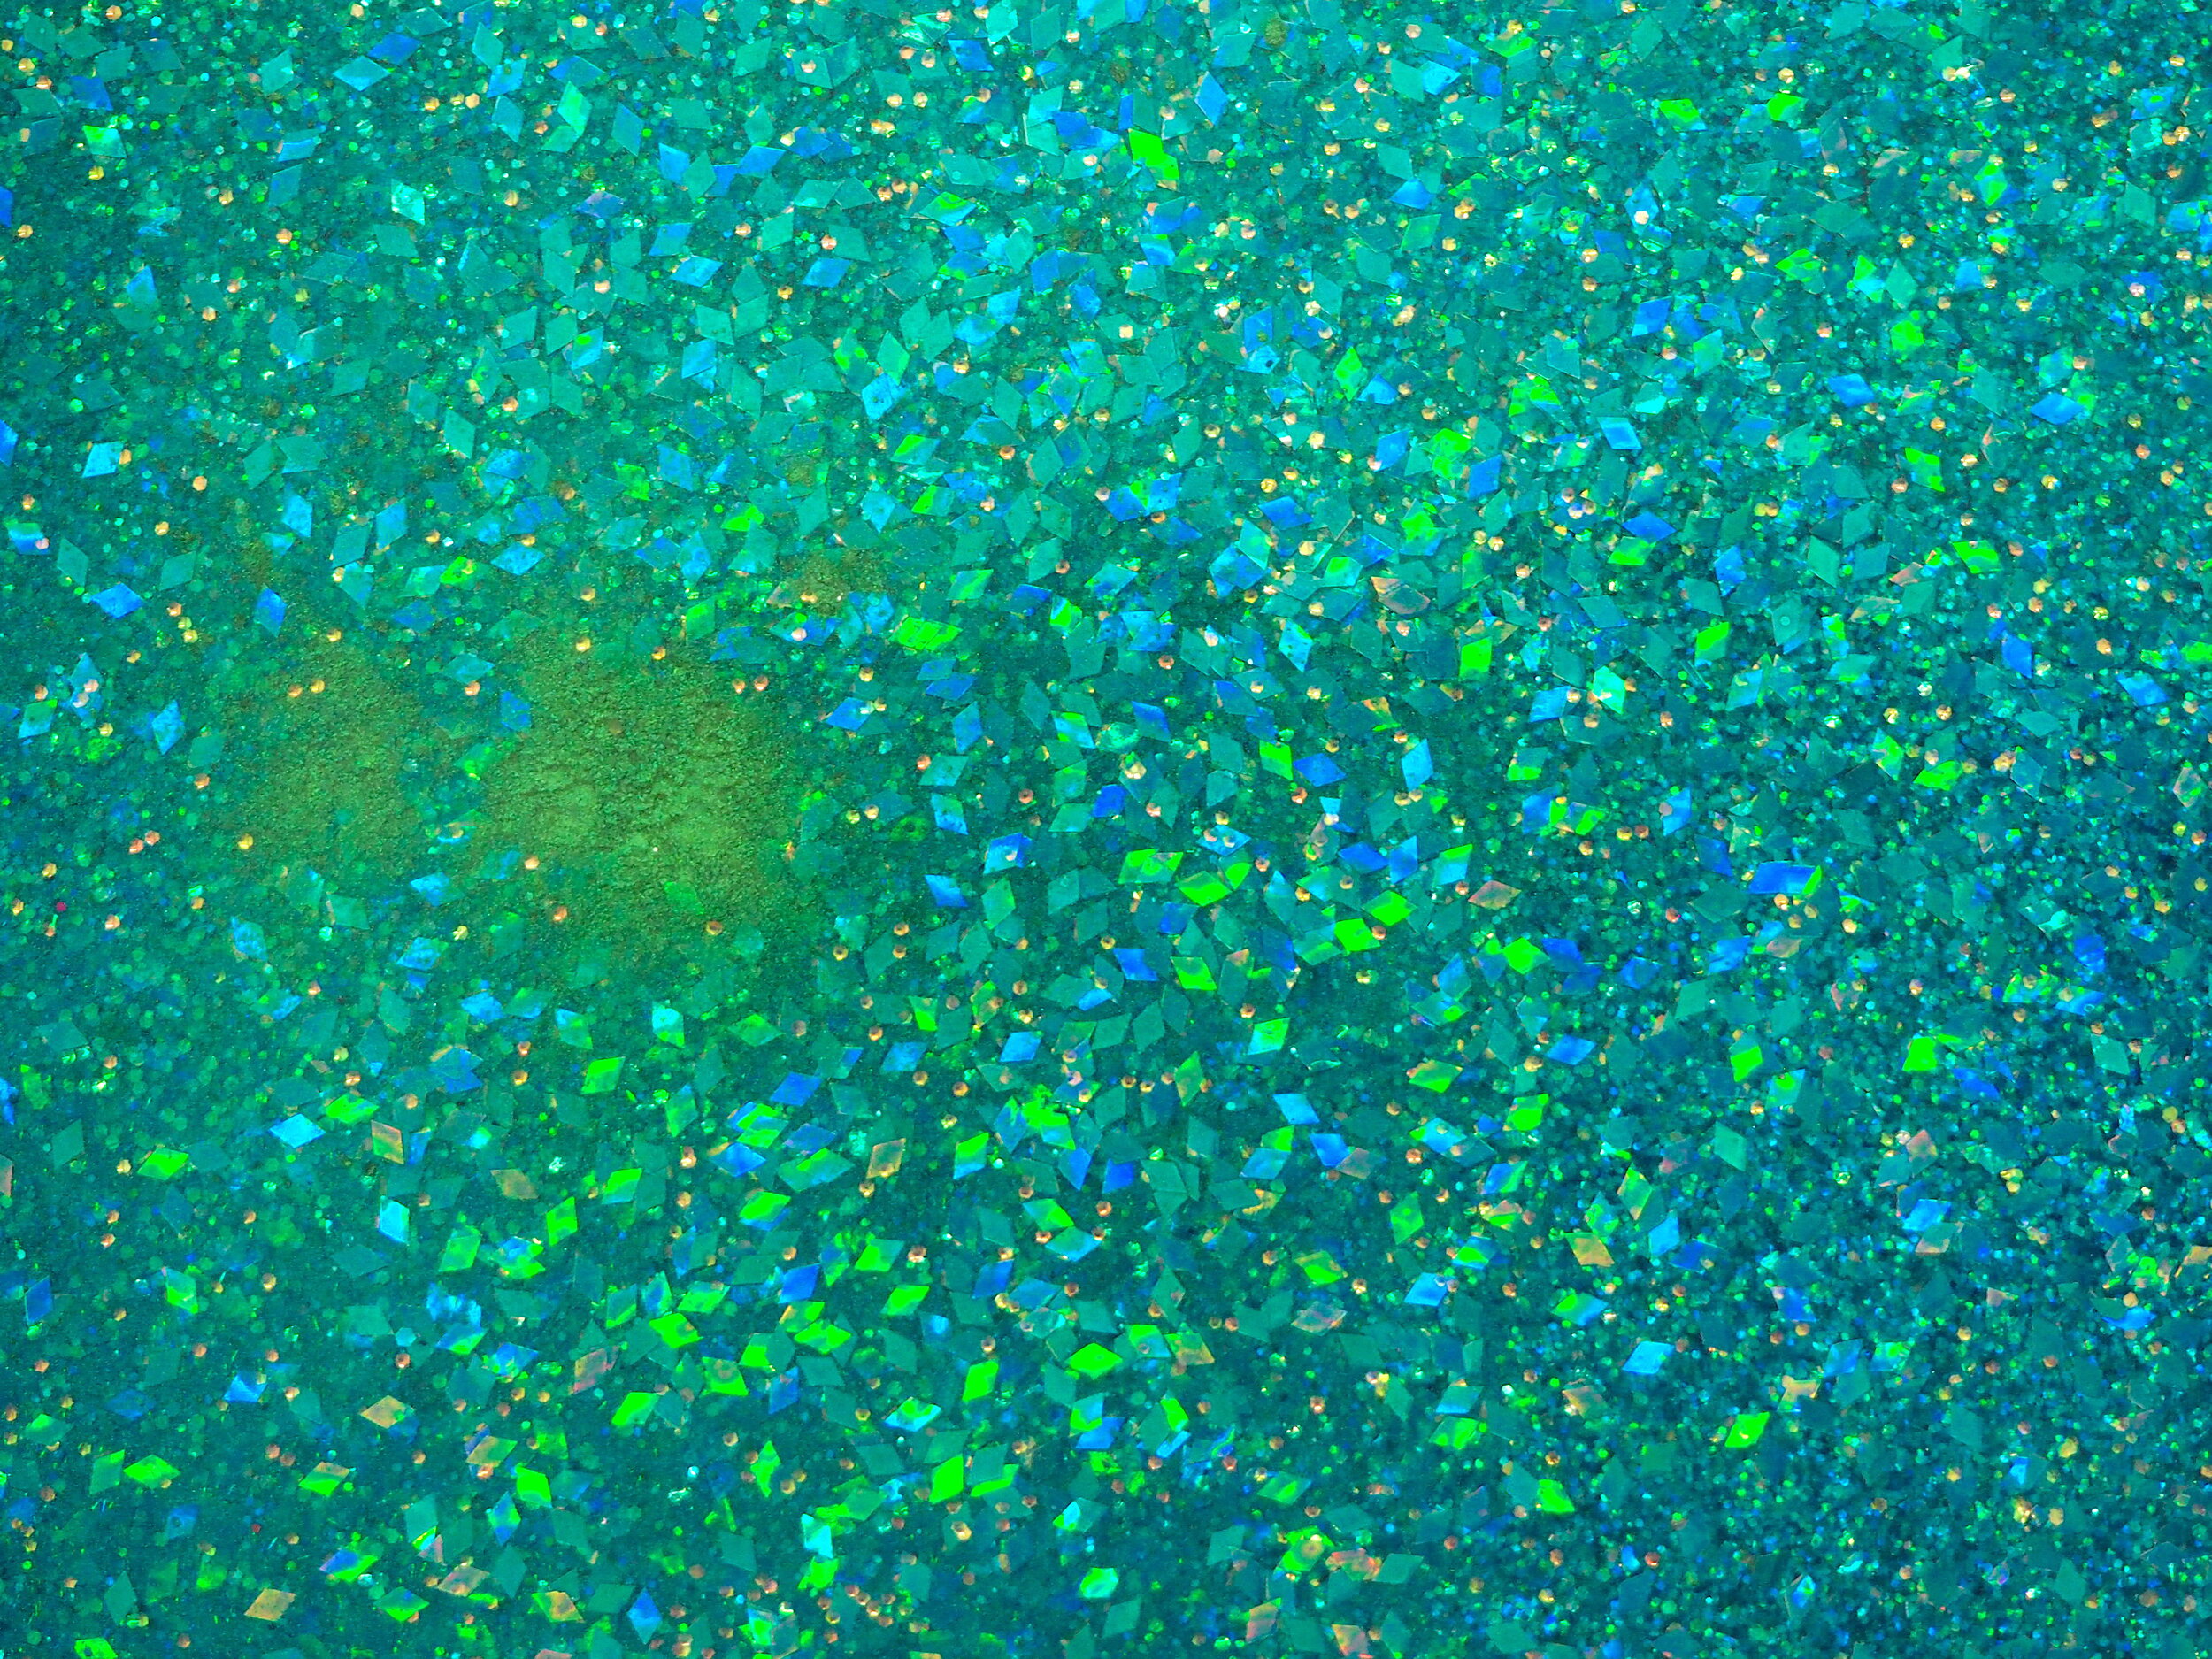   Green Blow , 2020 urethane, candy paint, flake, holographic flake, and pearl flake on wood panel 18 x 18 in (45.7 x 45.7 cm)  